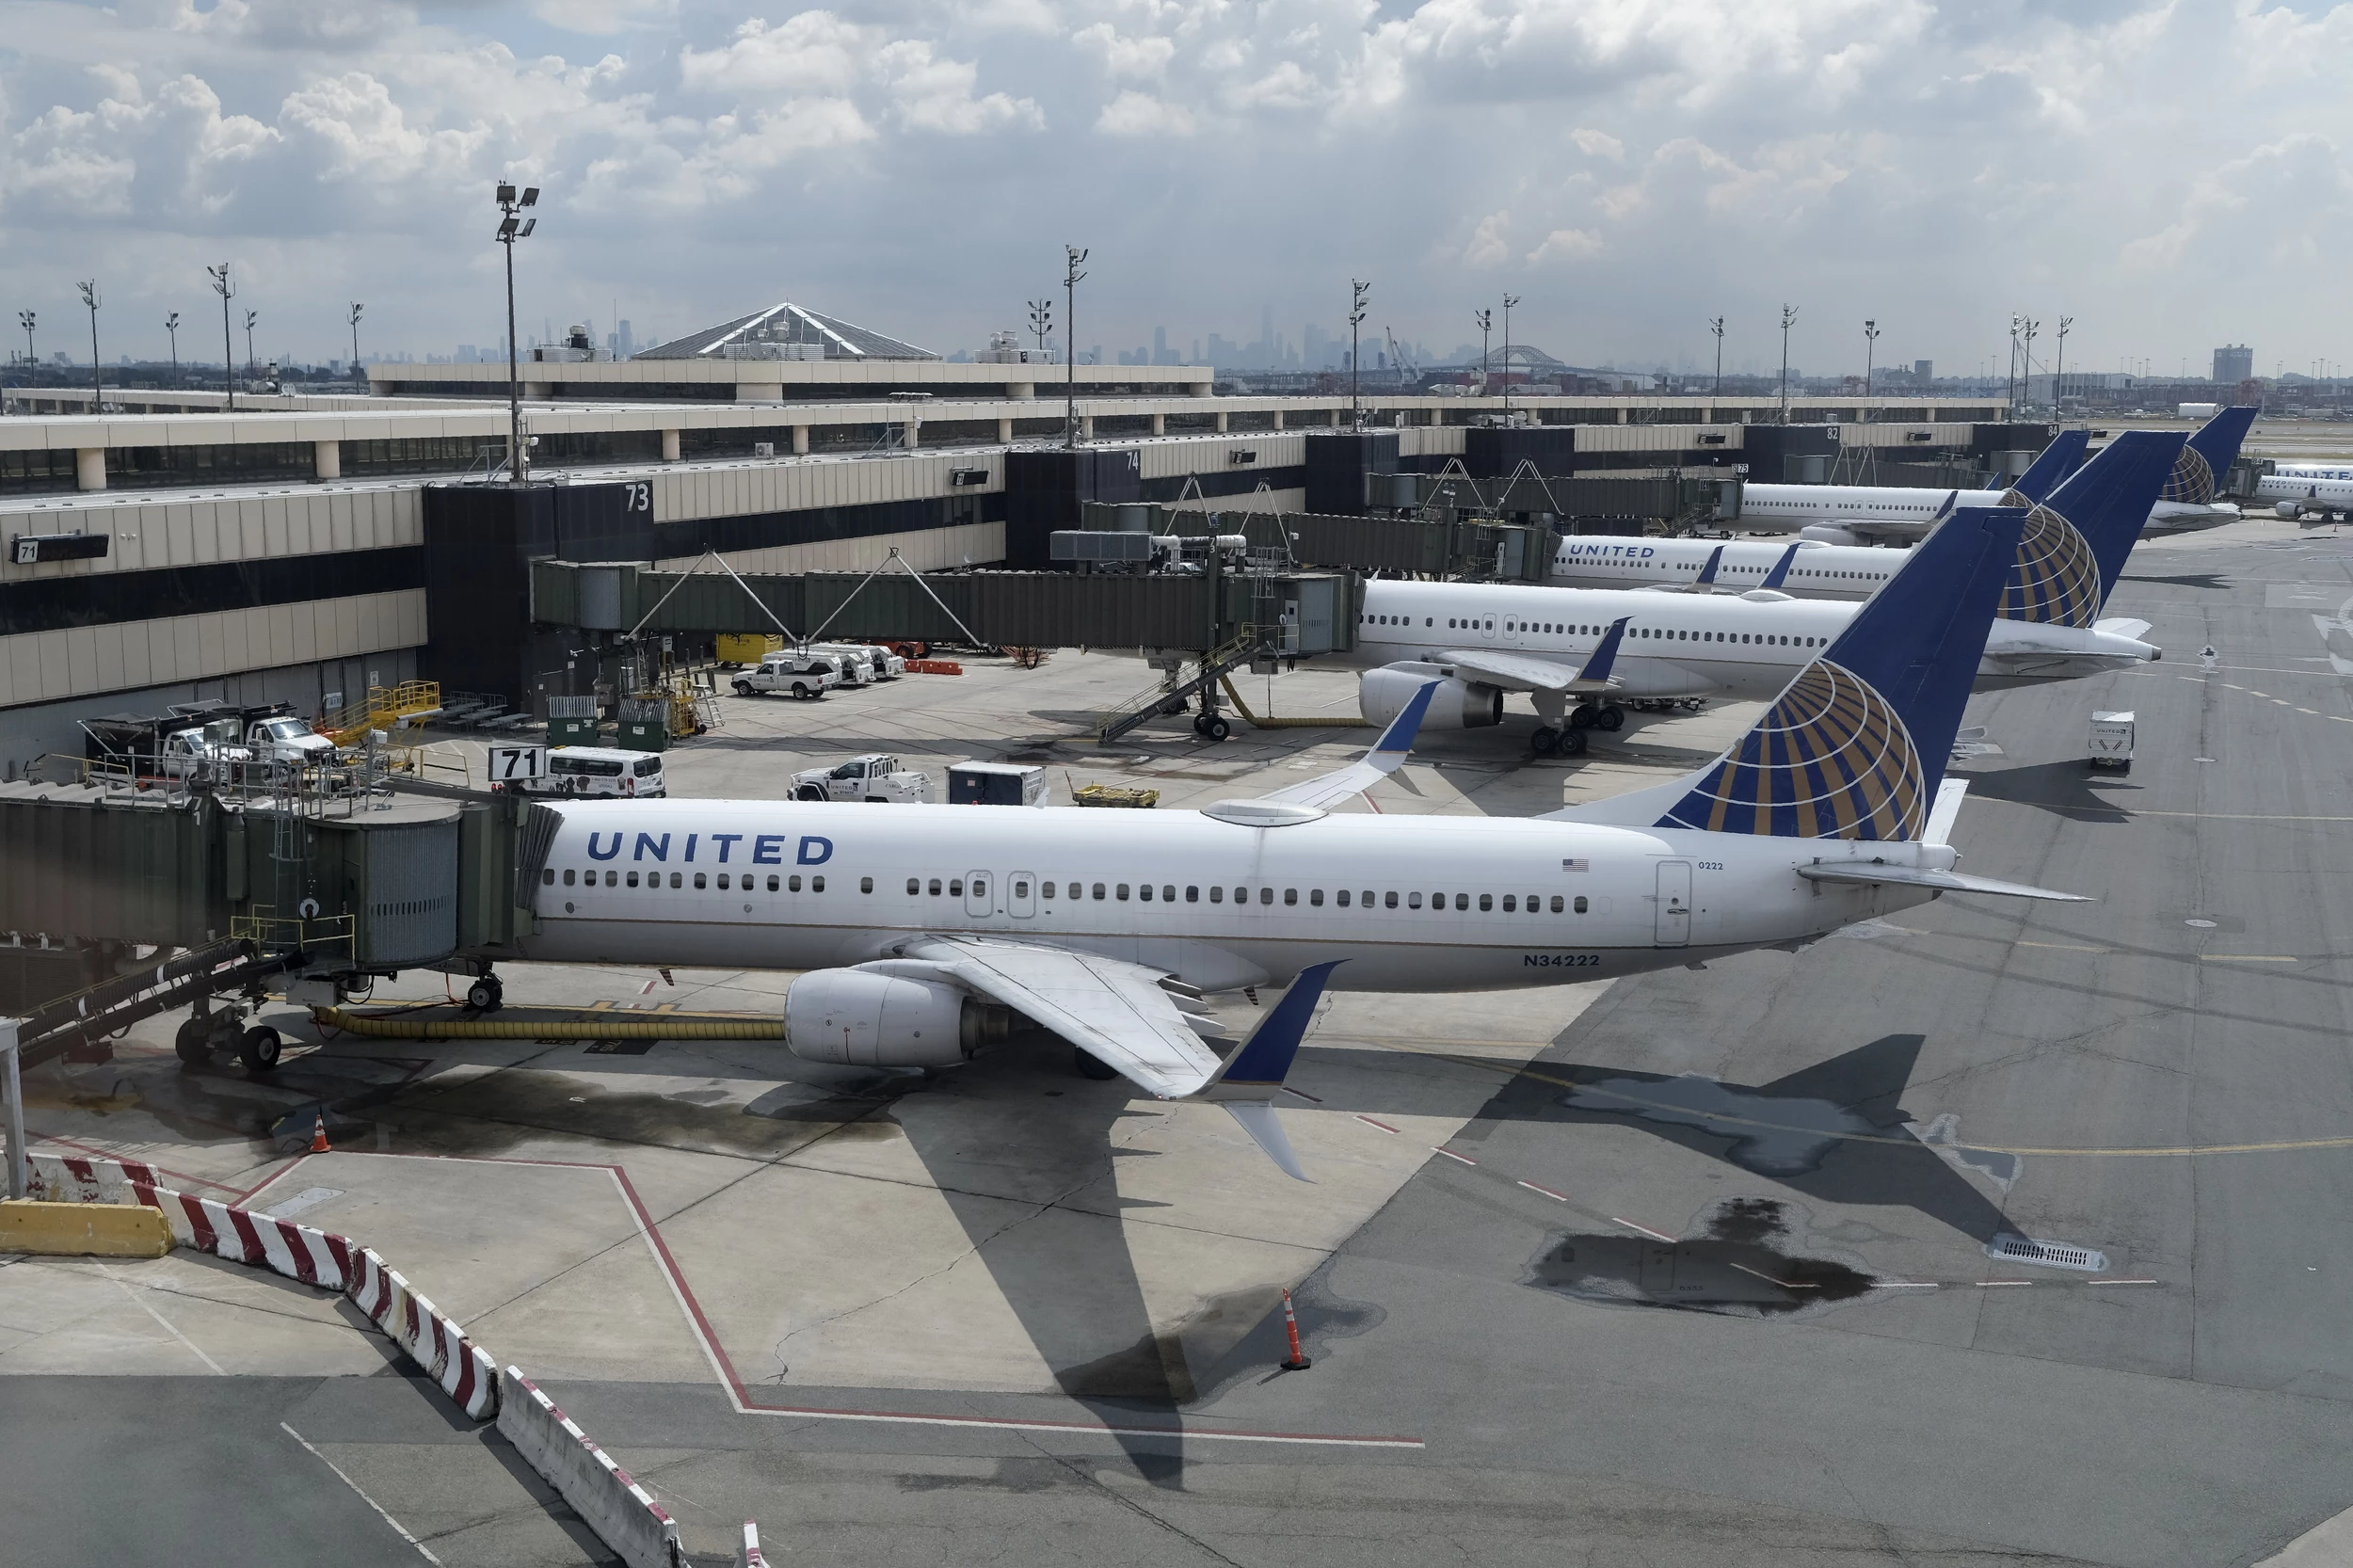 United cuts flights at Newark, NJ airport as cancellations mount